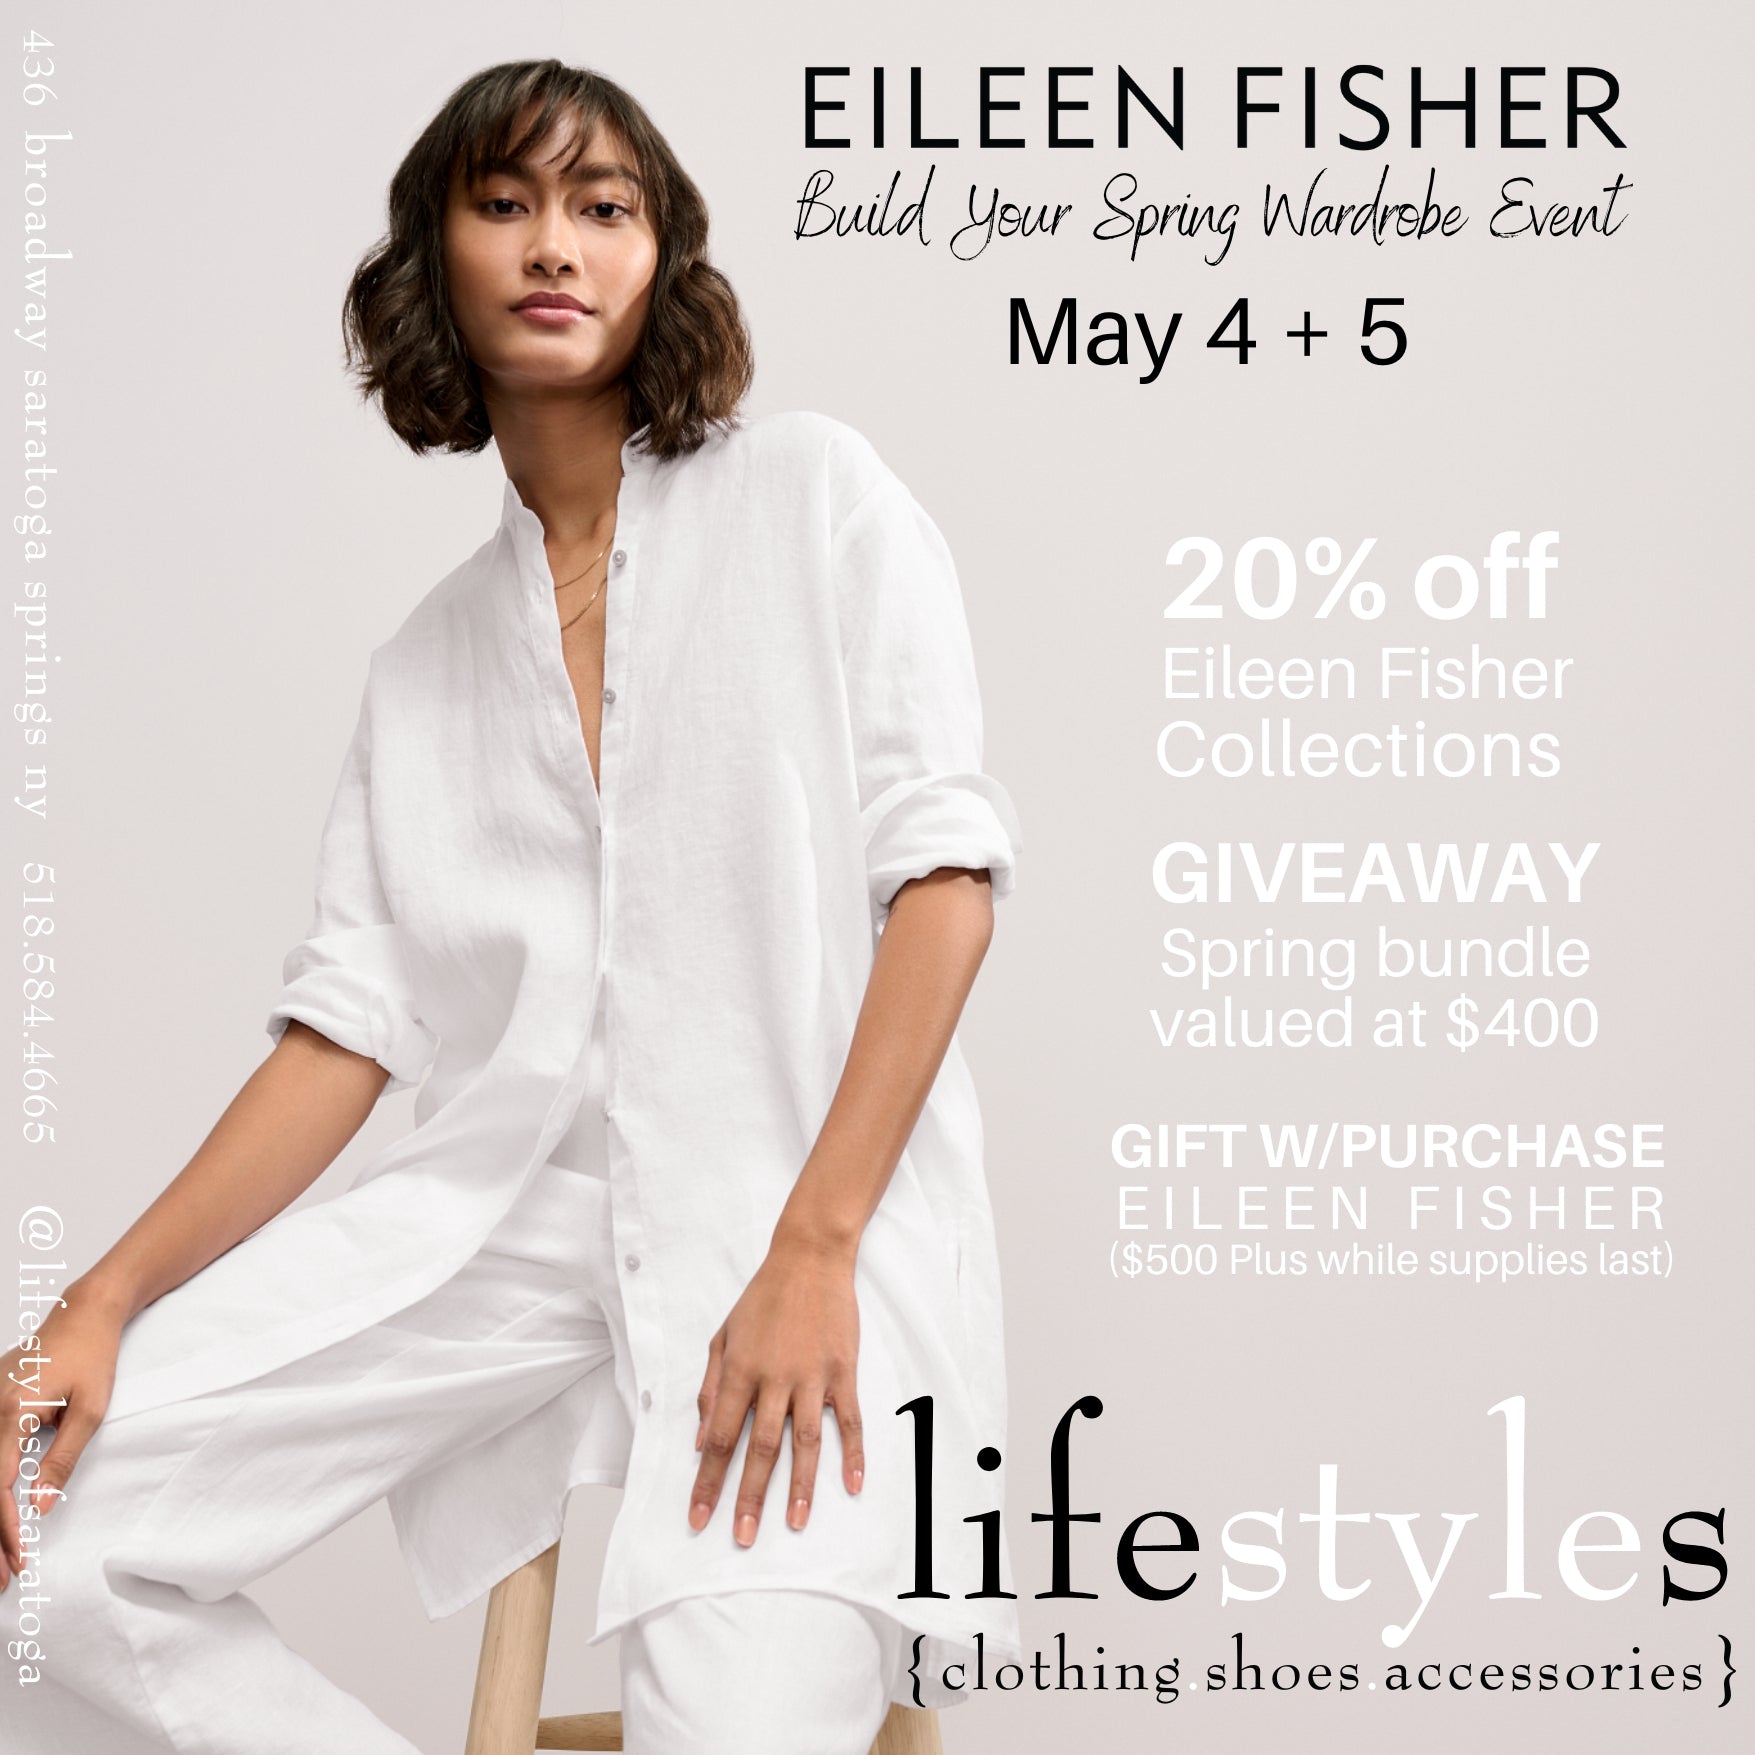 Eileen Fisher's timeless vision - Sep. 16, 2011